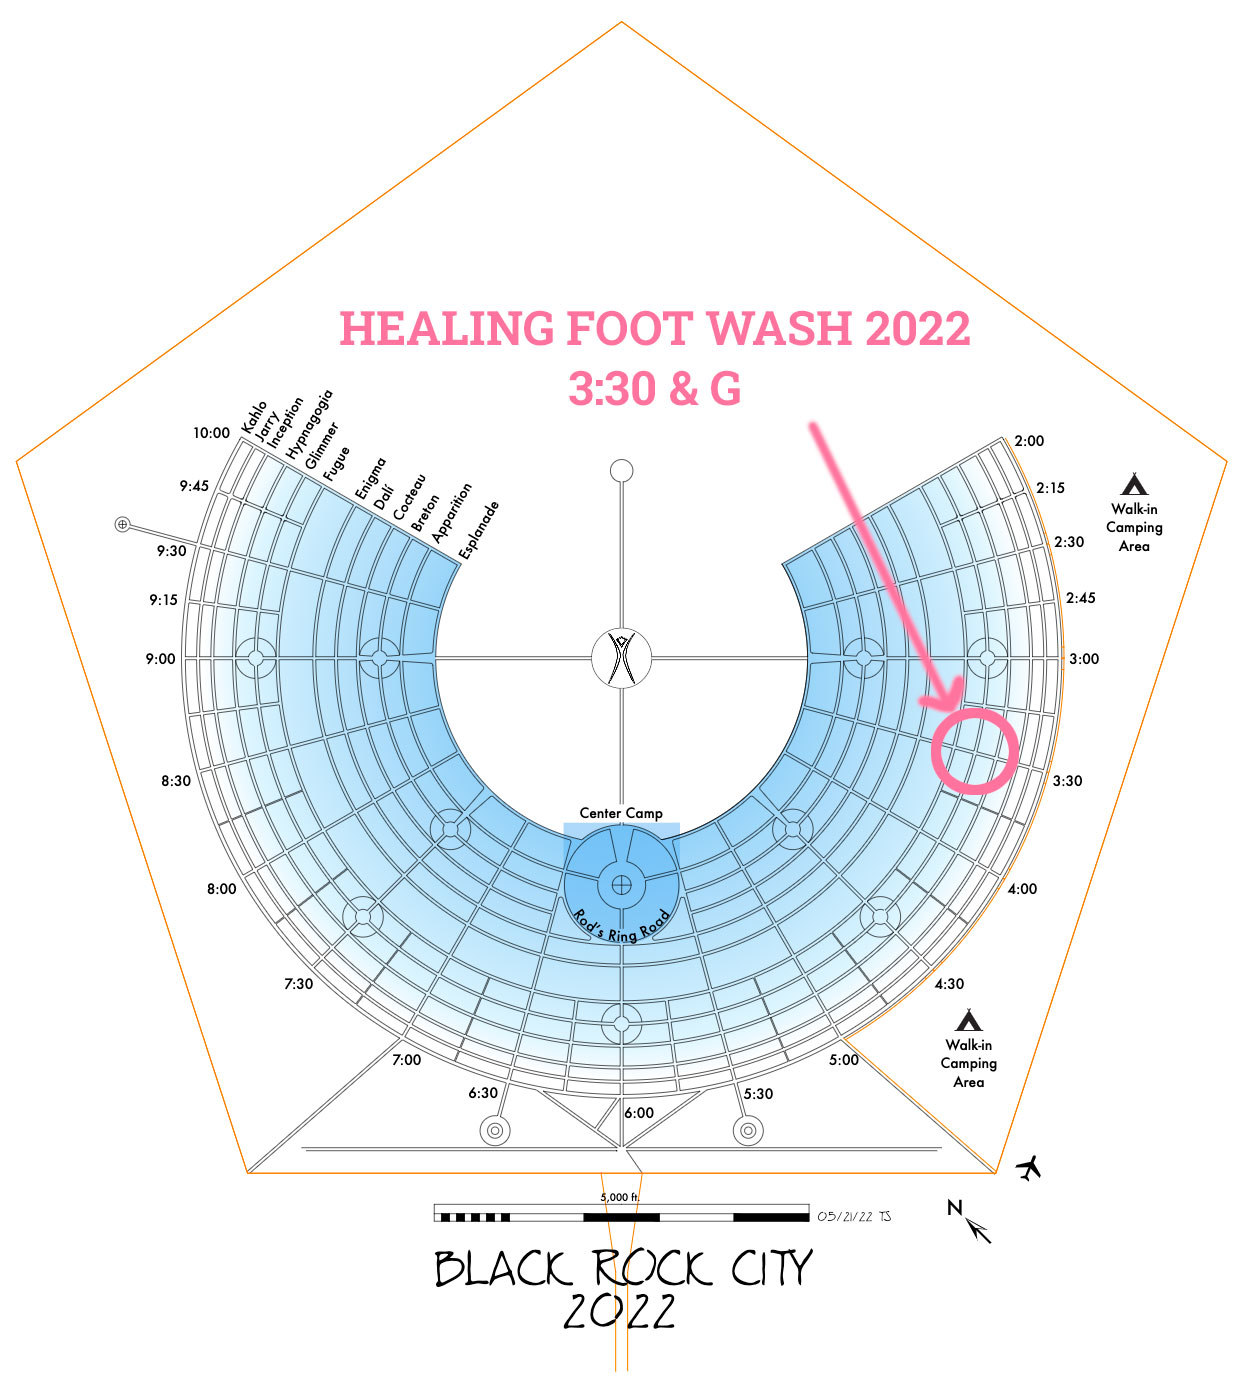 2022 Healing Foot Wash Placed 3:30 and G